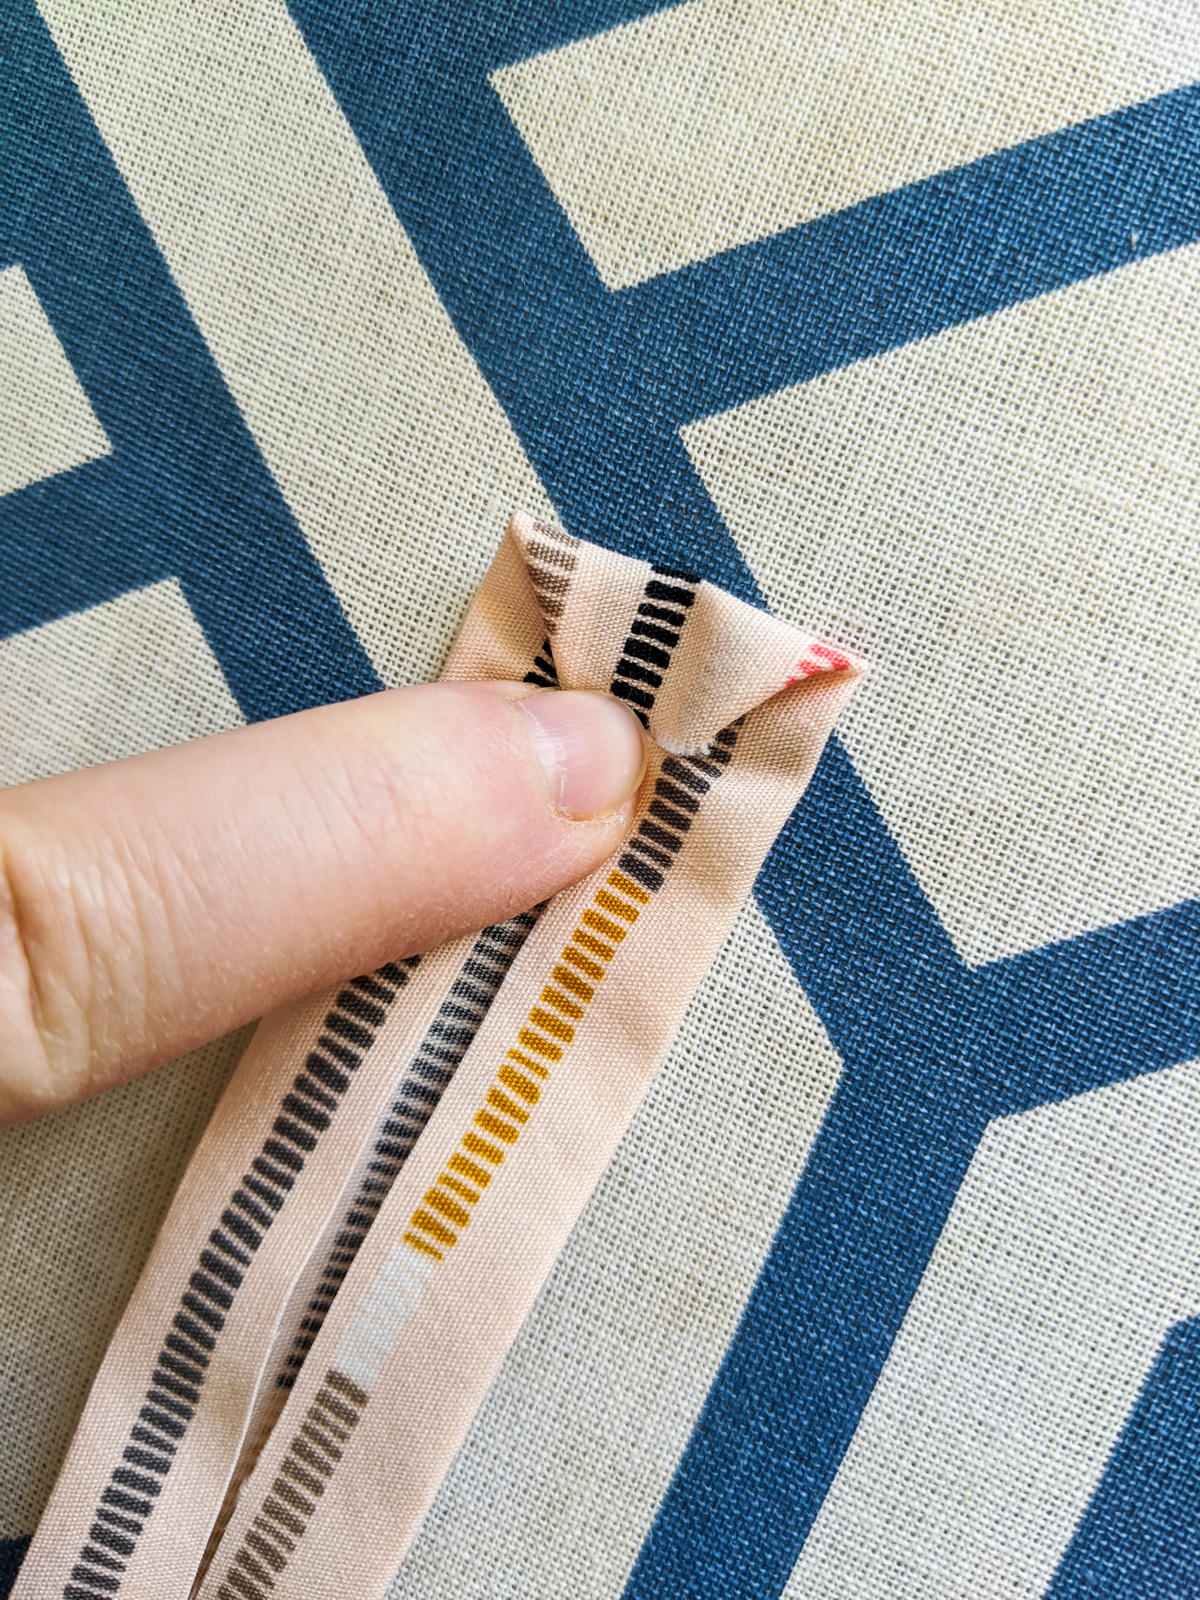 This DIY Quilted Checkerboard is the perfect project for any beginner looking to learn the basics of quilting in a fun, easy project!